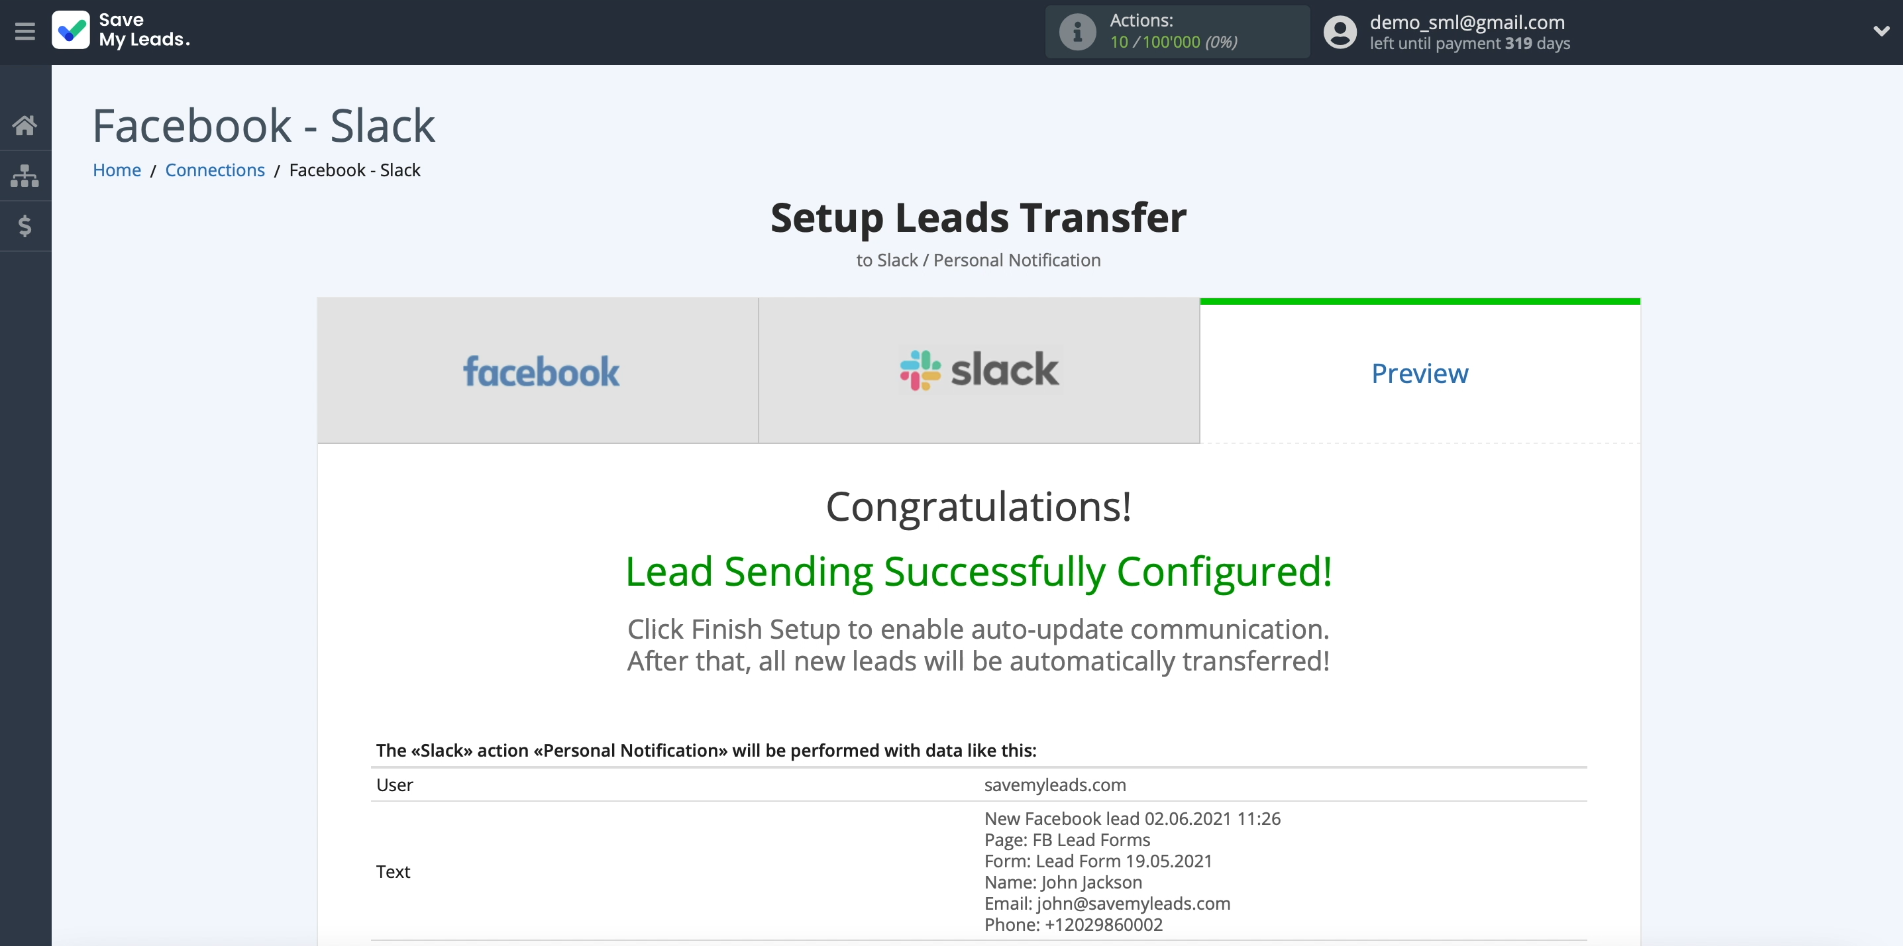 How to set up the upload of new leads from Facebook ad account to Slack private messages |&nbsp;Example of lead data part 1